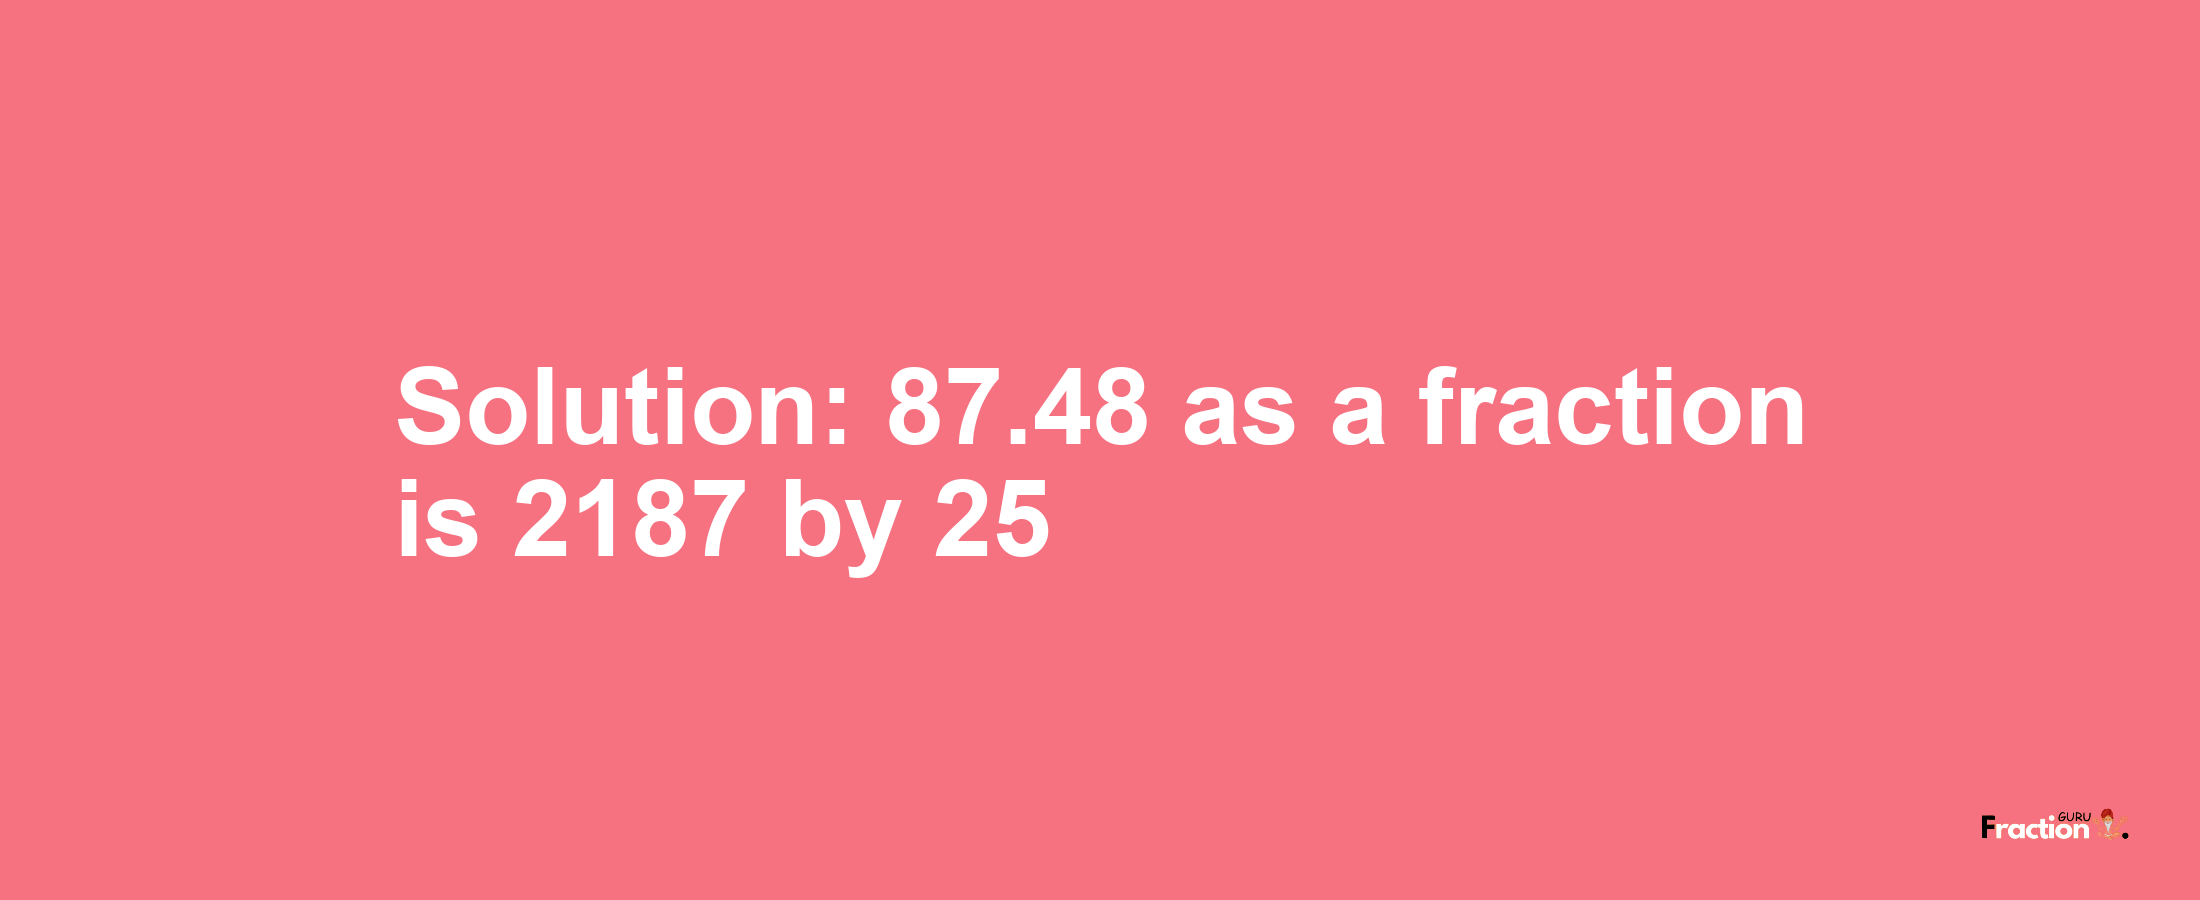 Solution:87.48 as a fraction is 2187/25